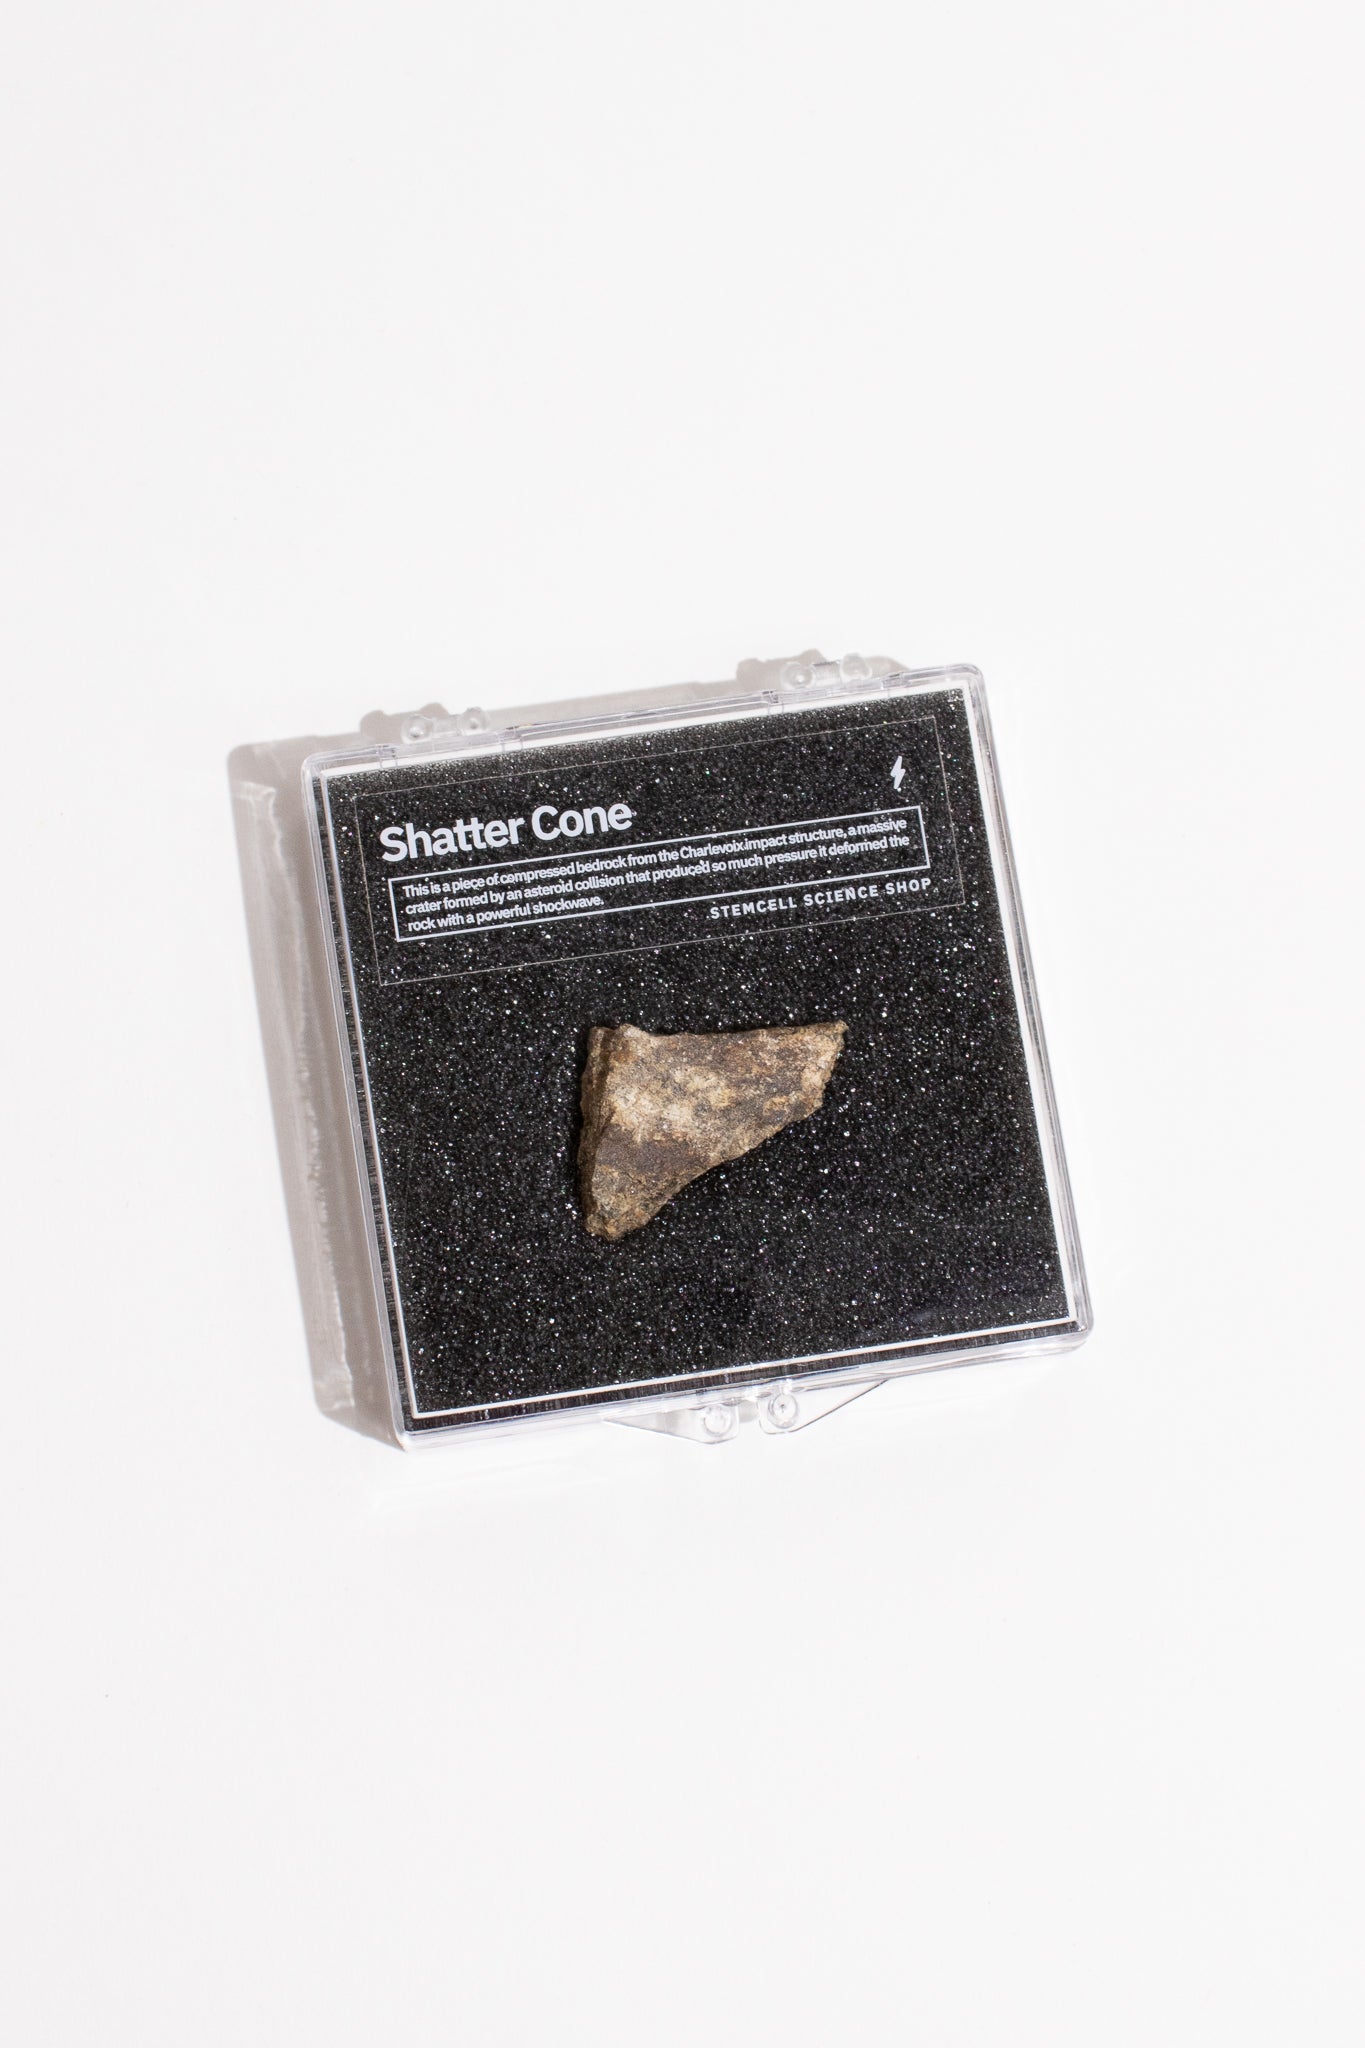 Shatter Cone - Stemcell Science Shop